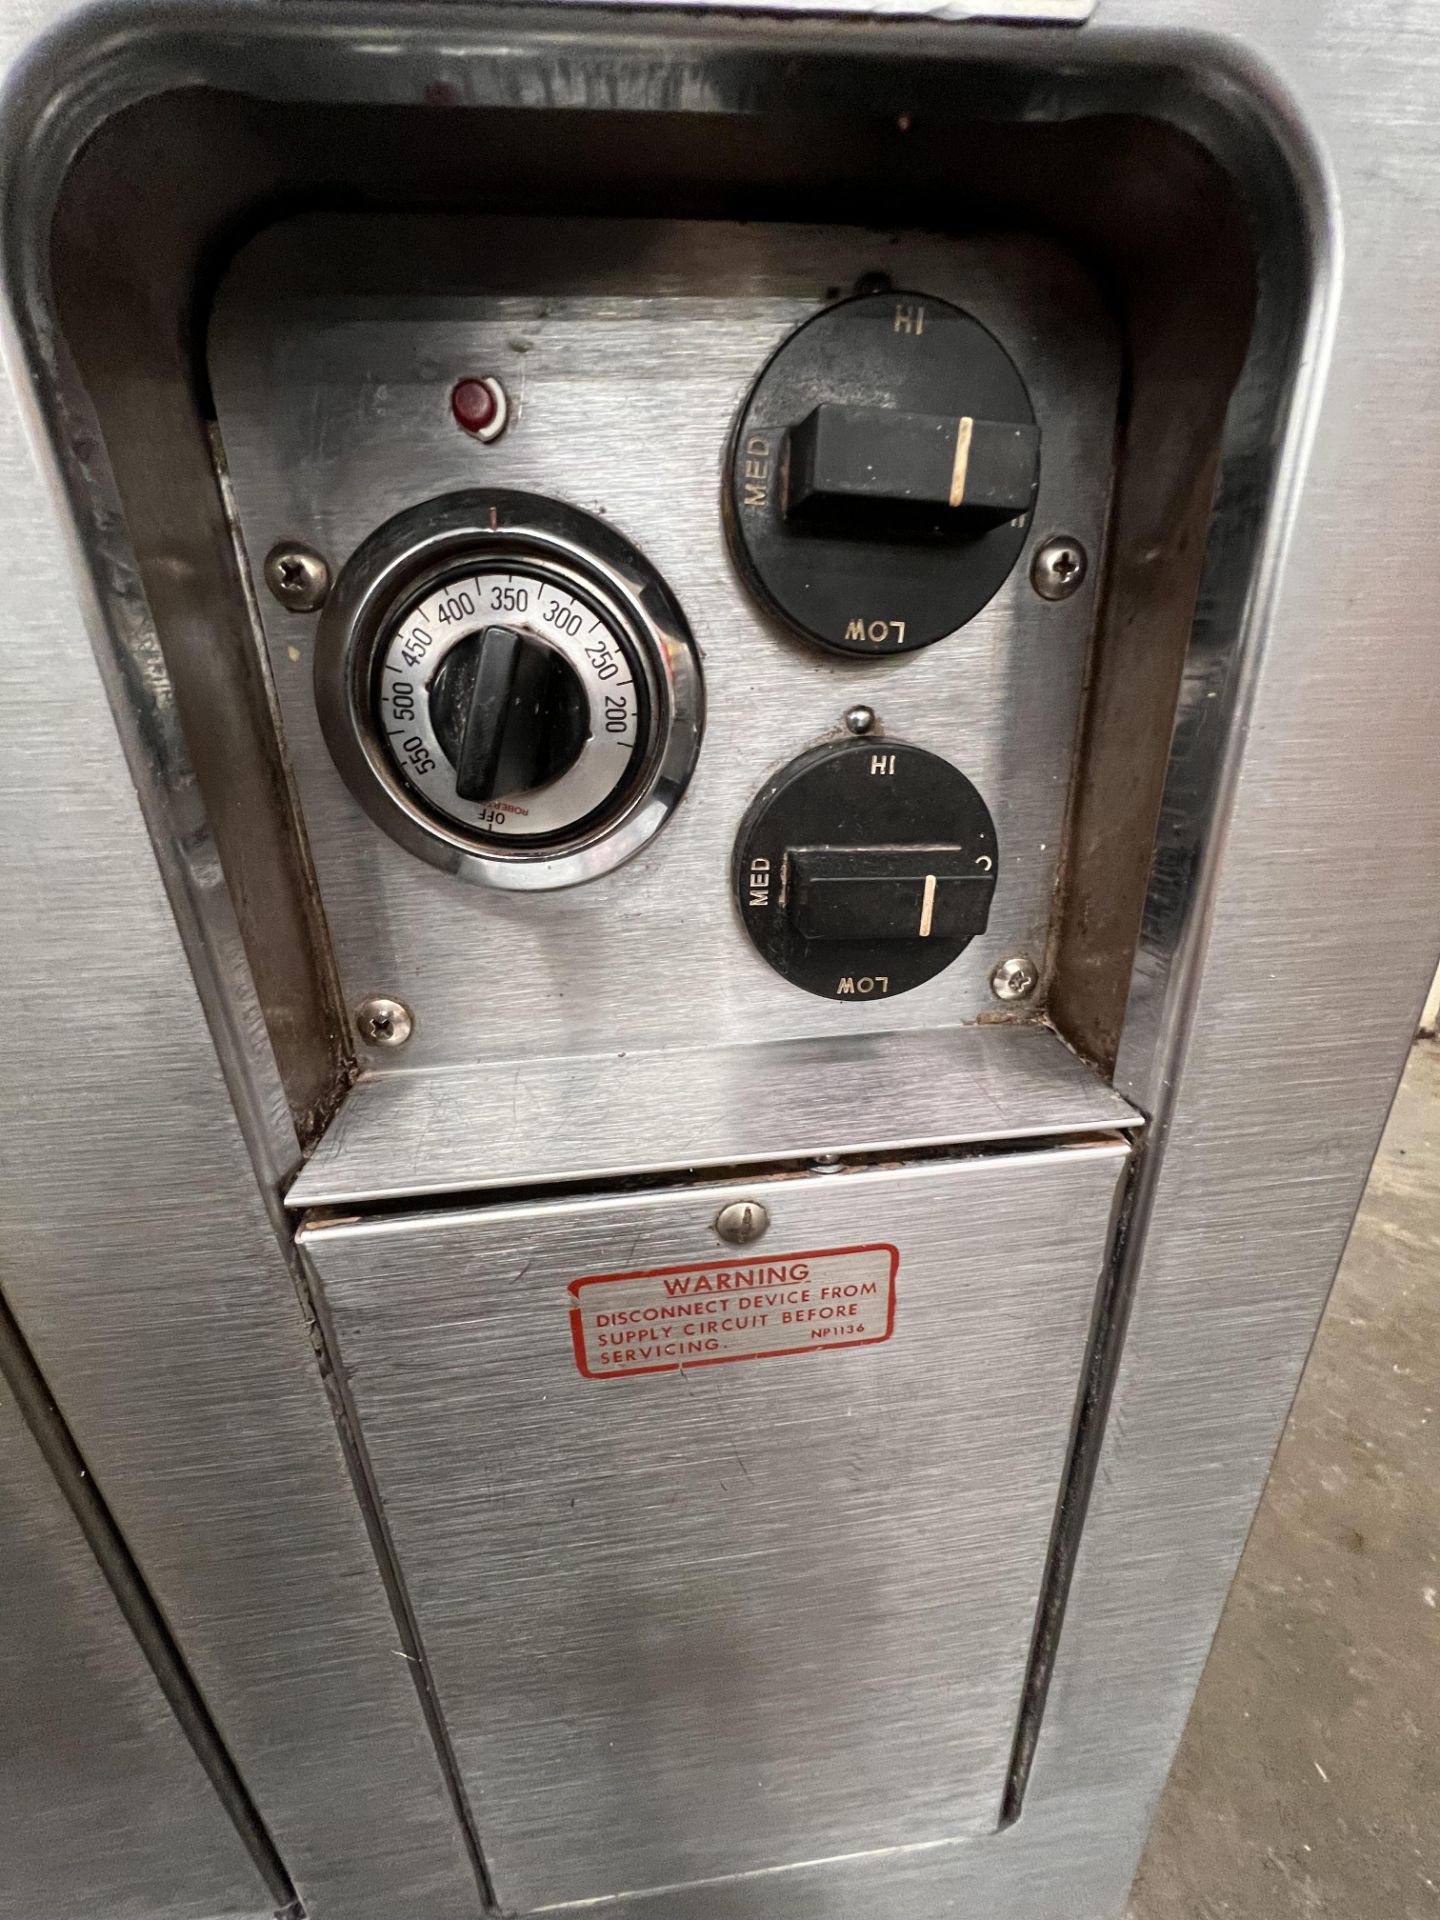 HOBART S/S OVEN, MODEL CN-40, S/N 480N016-C10, APPROX. 24 IN. W X 26 IN. D480, 1 PHASE - Image 8 of 11